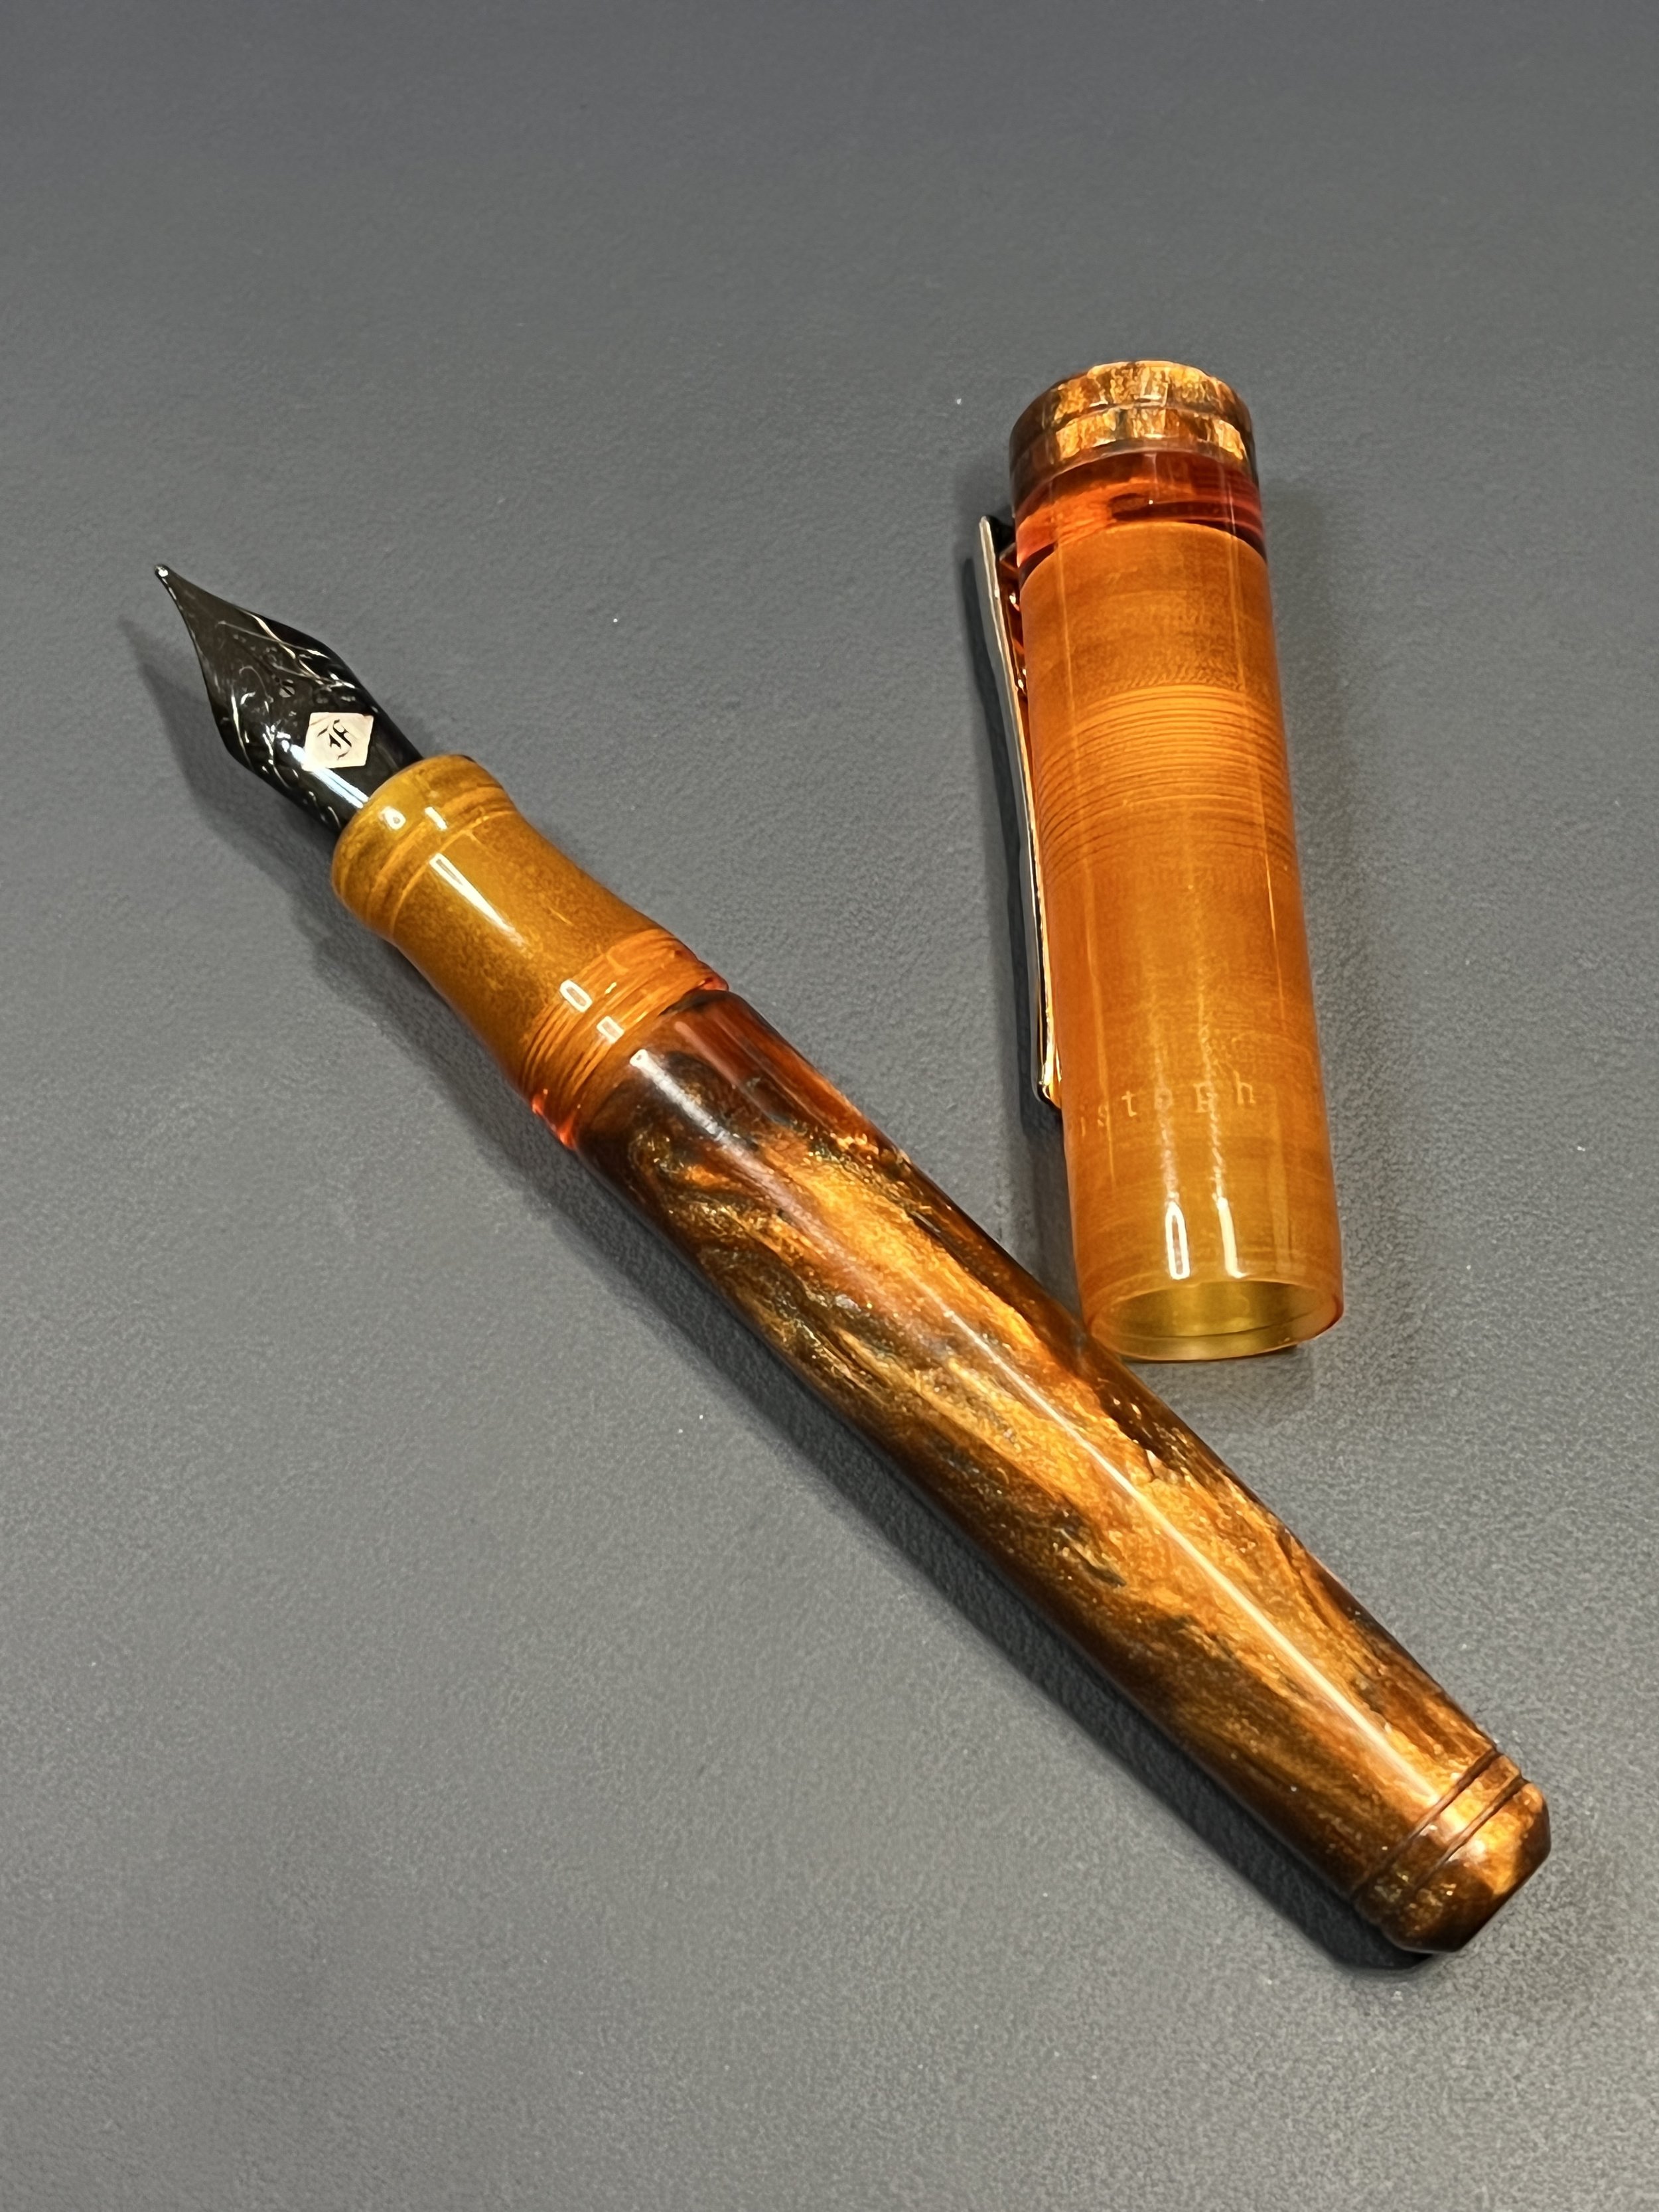 Pocket Size Fountain Pens for Journaling – My two favourites